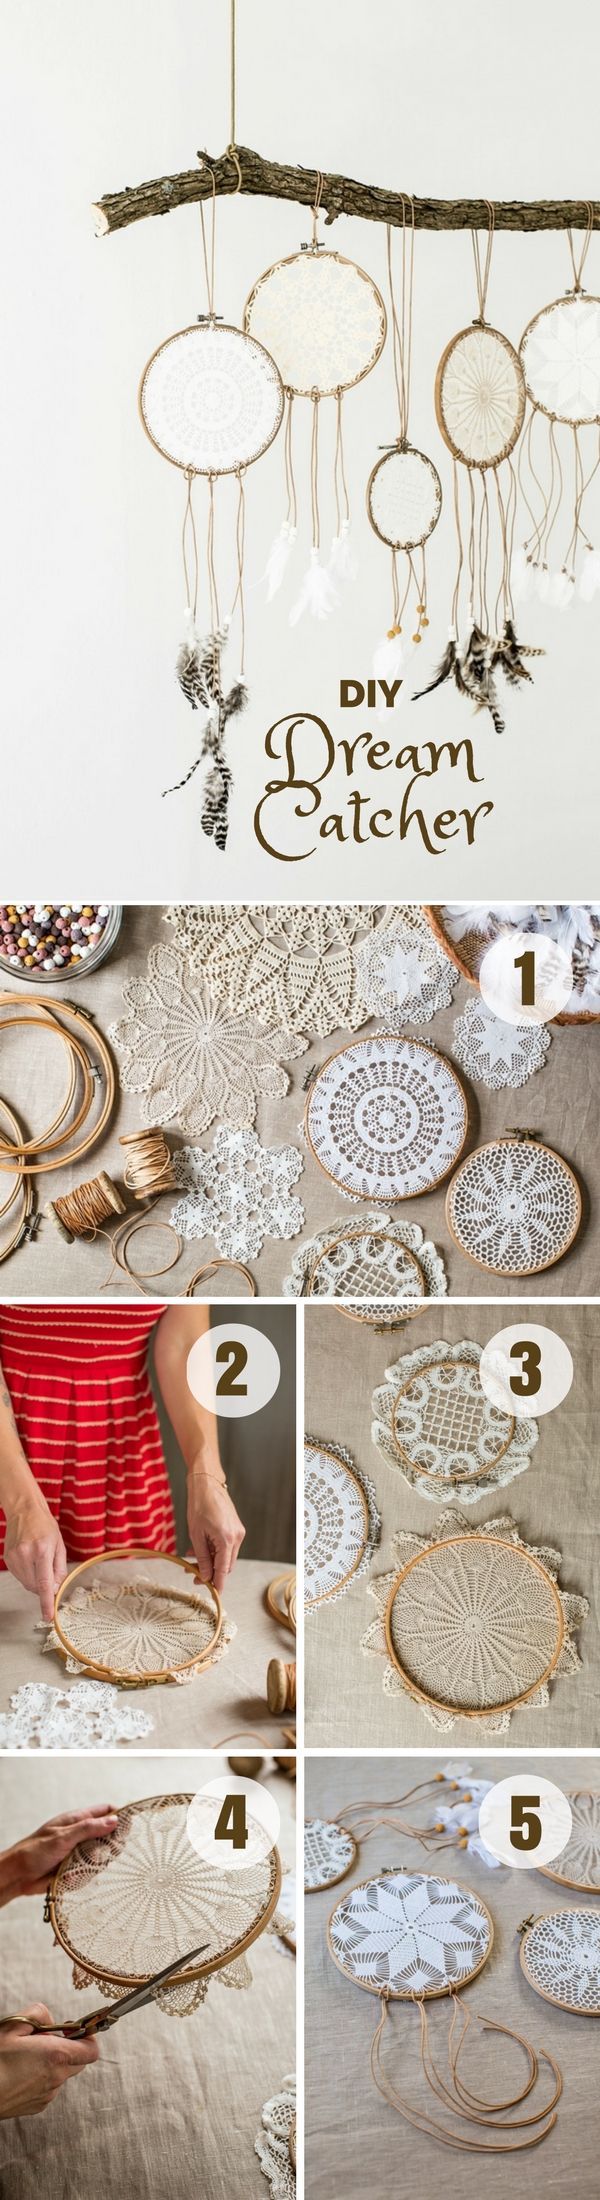 Check out how to easily make this DIY Dream Catcher @Industry Standard Design